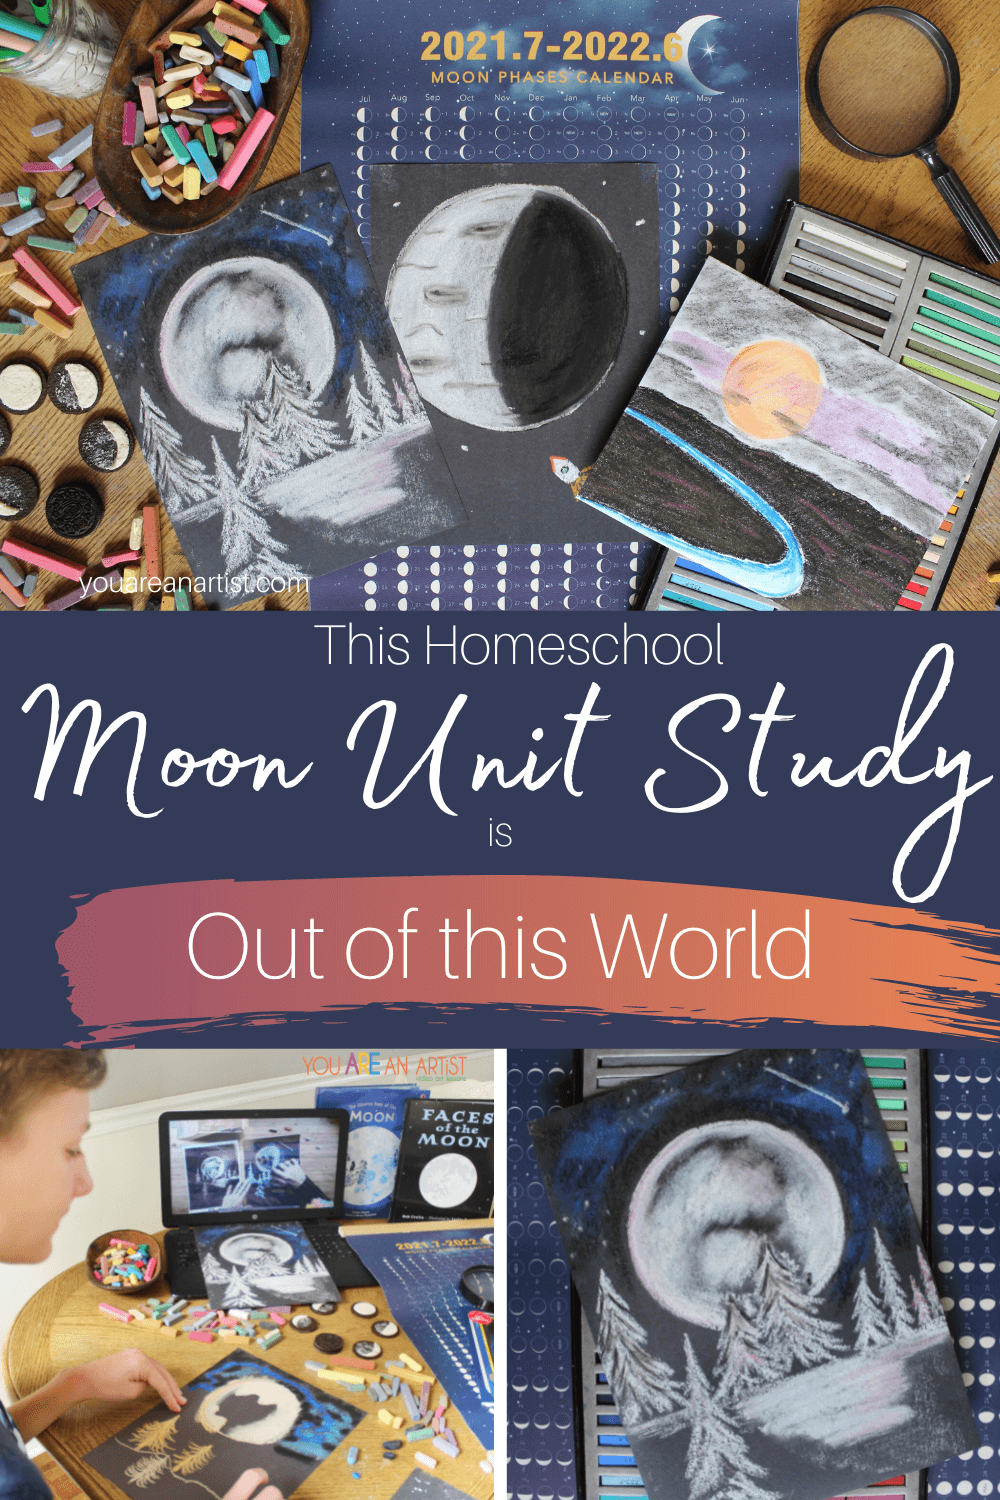 This Homeschool Moon Unit Study Is Out Of This World: Moon activities, books, and fun art lessons for all ages! Learn about moon phases and more with this homeschool moon unit study! #moonunit #moonactivities #moonunitstudy #phasesofthemoon #onlinehomeschoollessons #moonphaseunitstudy